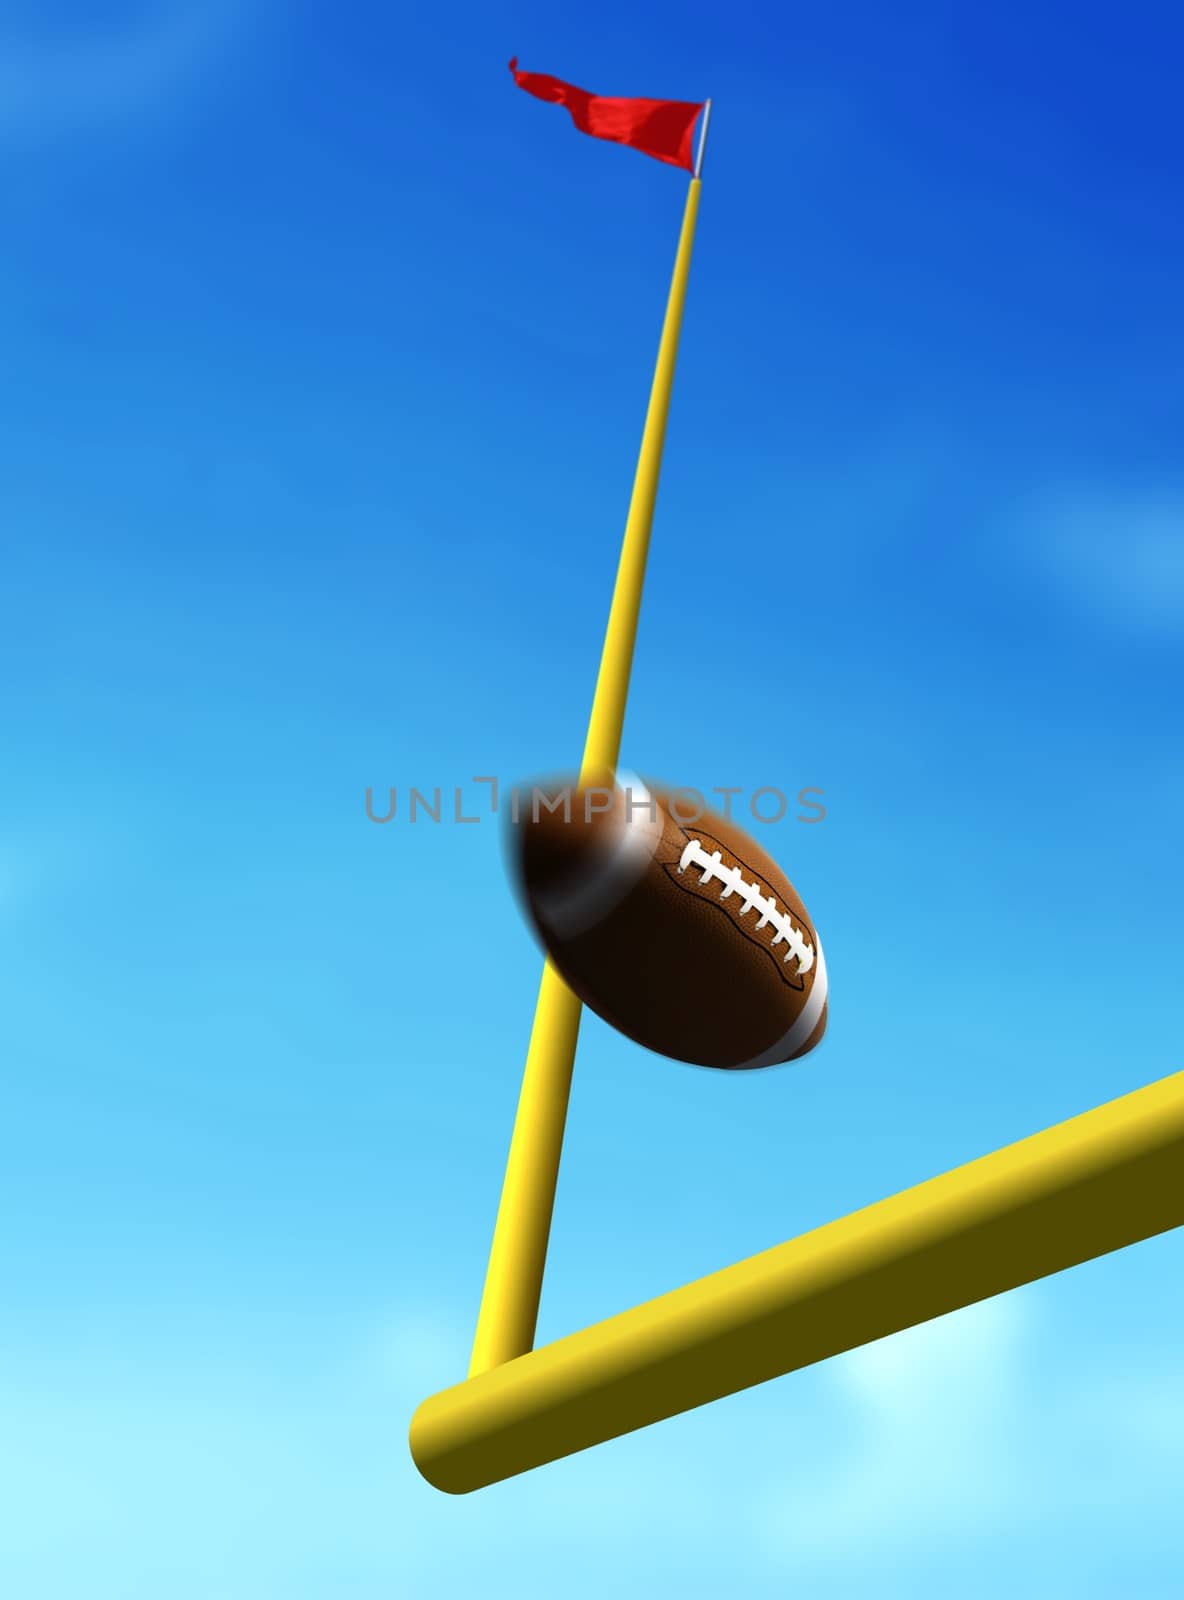 Football Ball Over Goal Post by razihusin